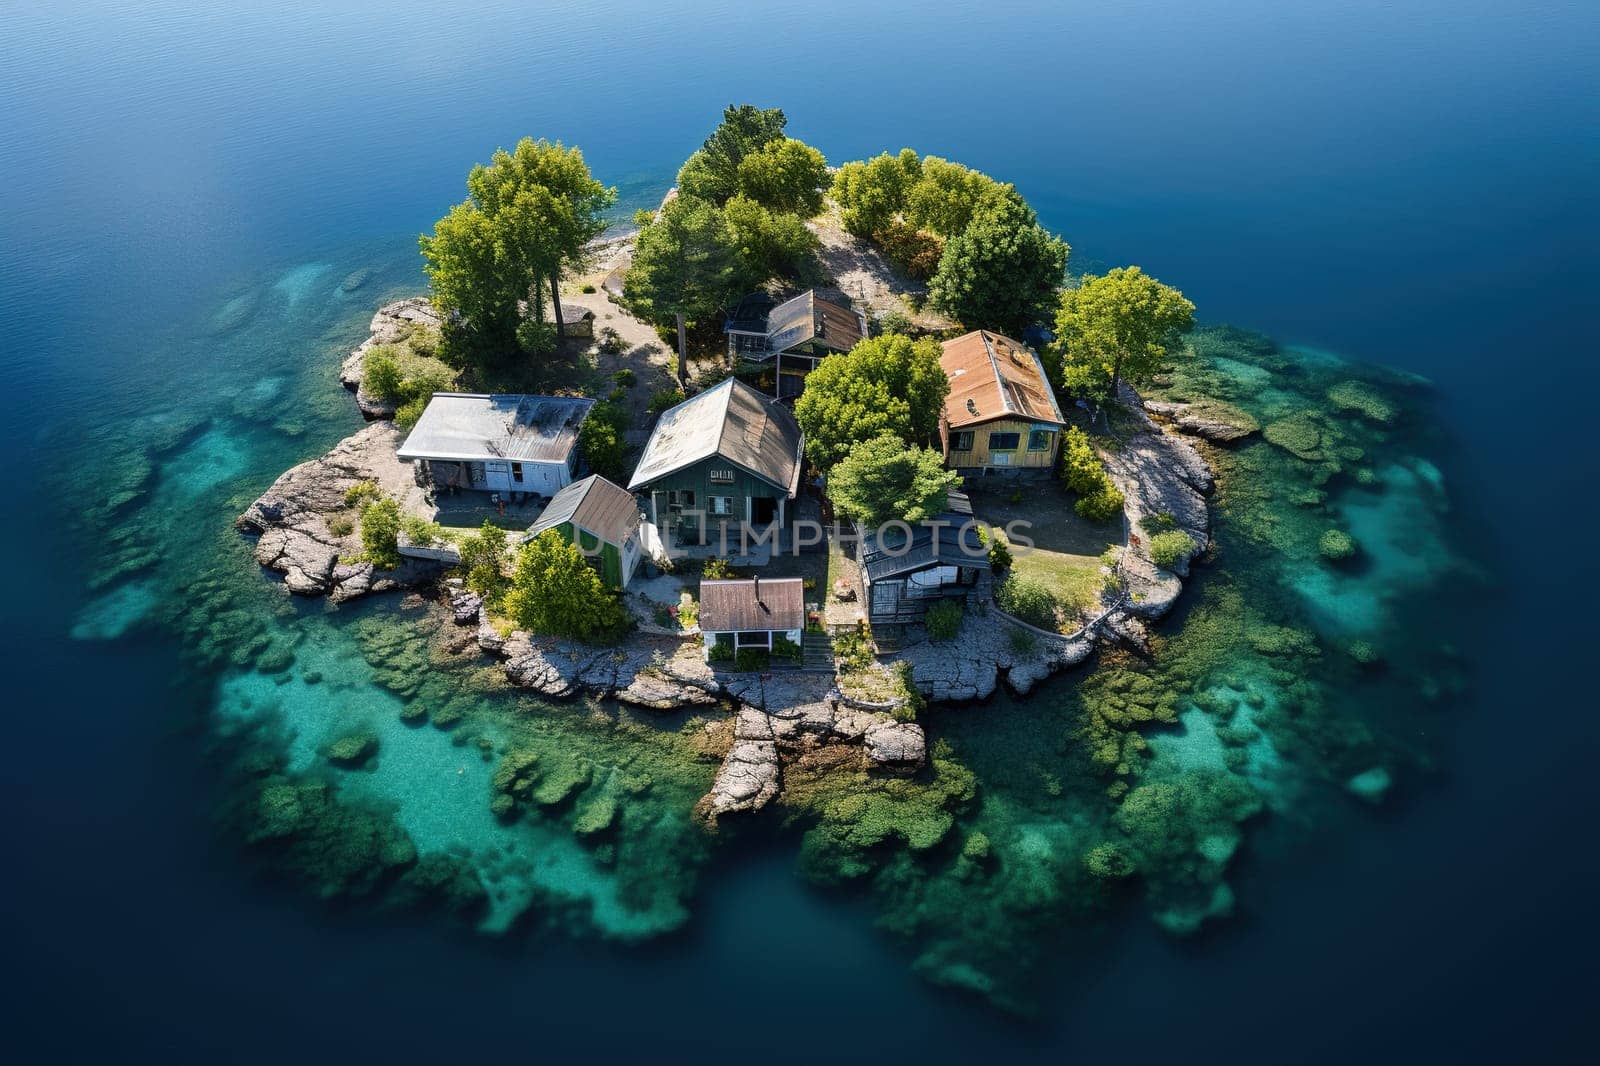 Top view of a small island with houses in the middle of the ocean, sea.